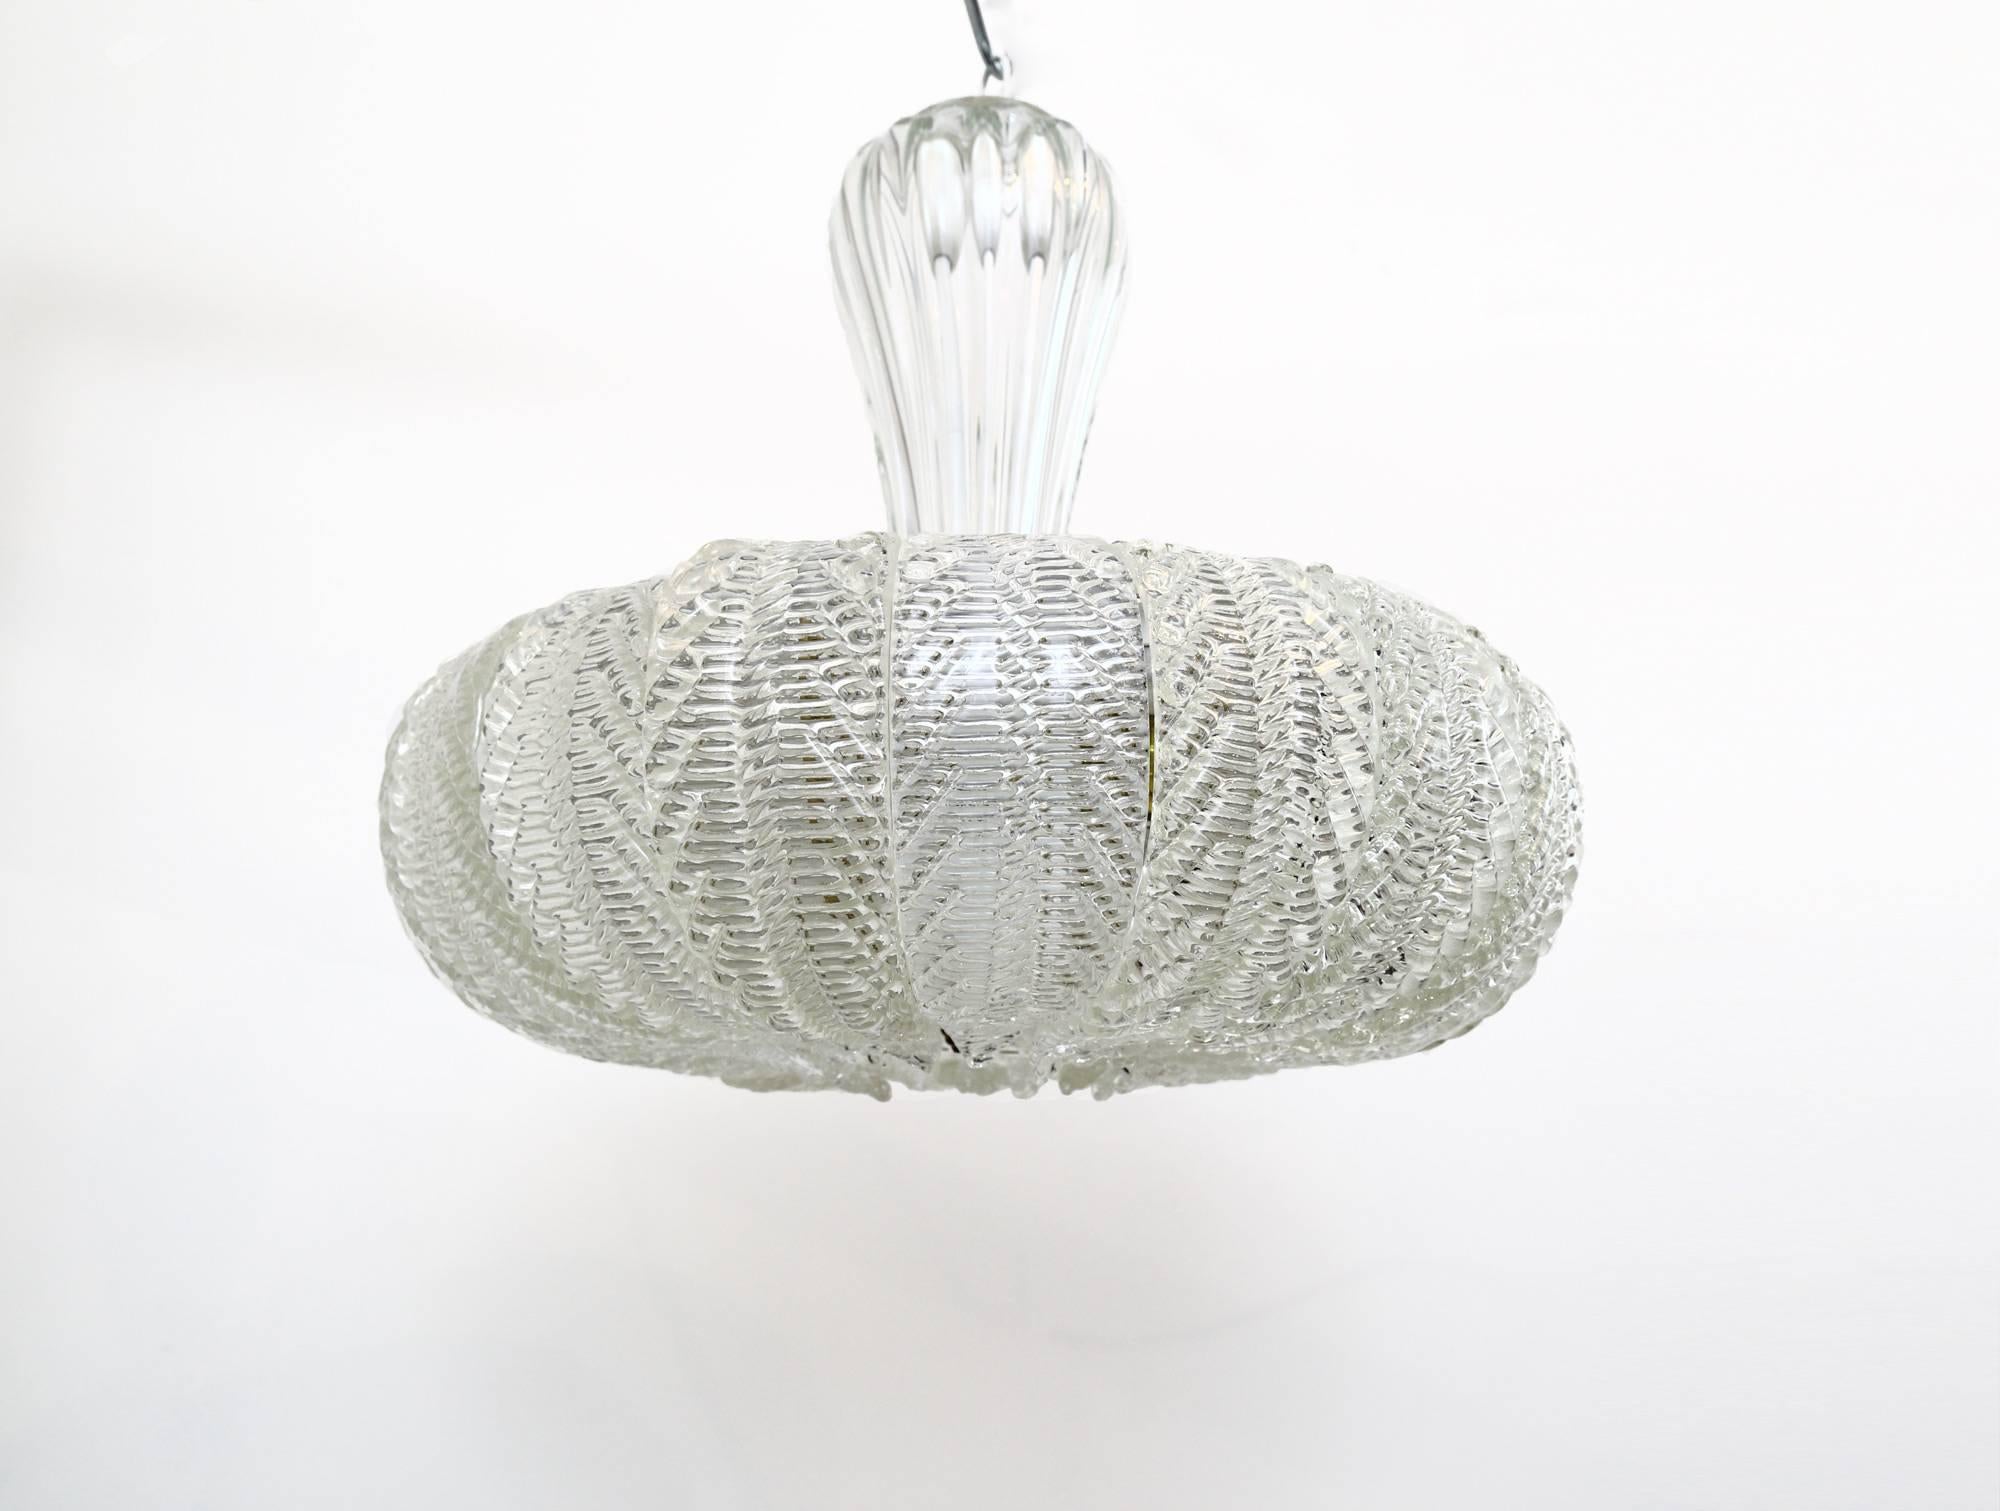 An exquisite, circa 1940s glass ceiling pendant by the famed Murano glass manufacturers, Barovier and Toso (attrib.) The internal three light fitting is encased within 20, handblown, curved glass leaves, whilst the glass diffuser plate underneath is